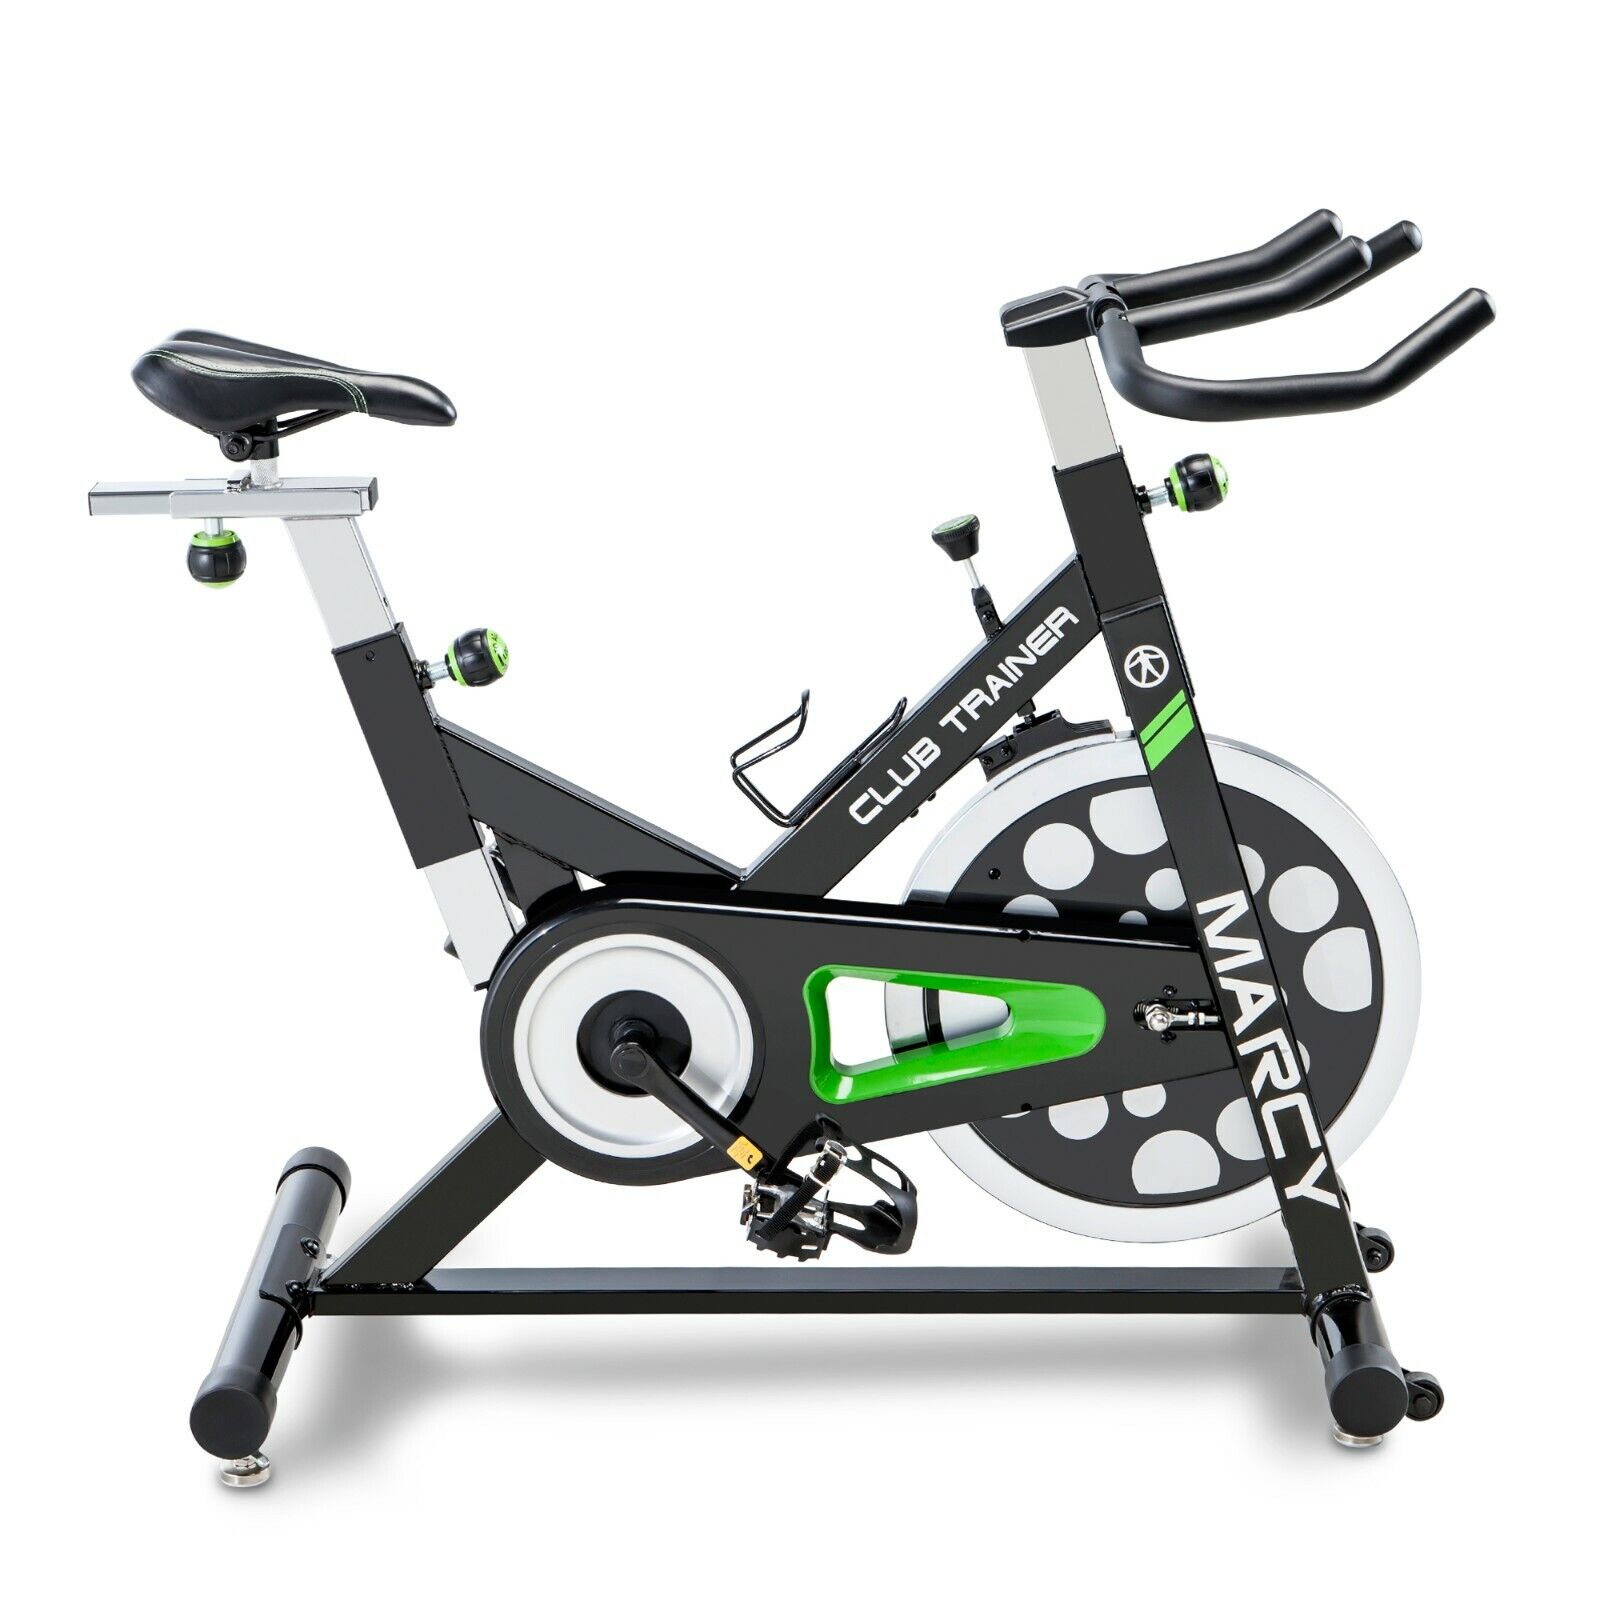 Marcy Revolution Cycle XJ-3220 Indoor Gym Trainer Exercise Stationary Pedal Bike Marcy XJ3220 - фотография #6